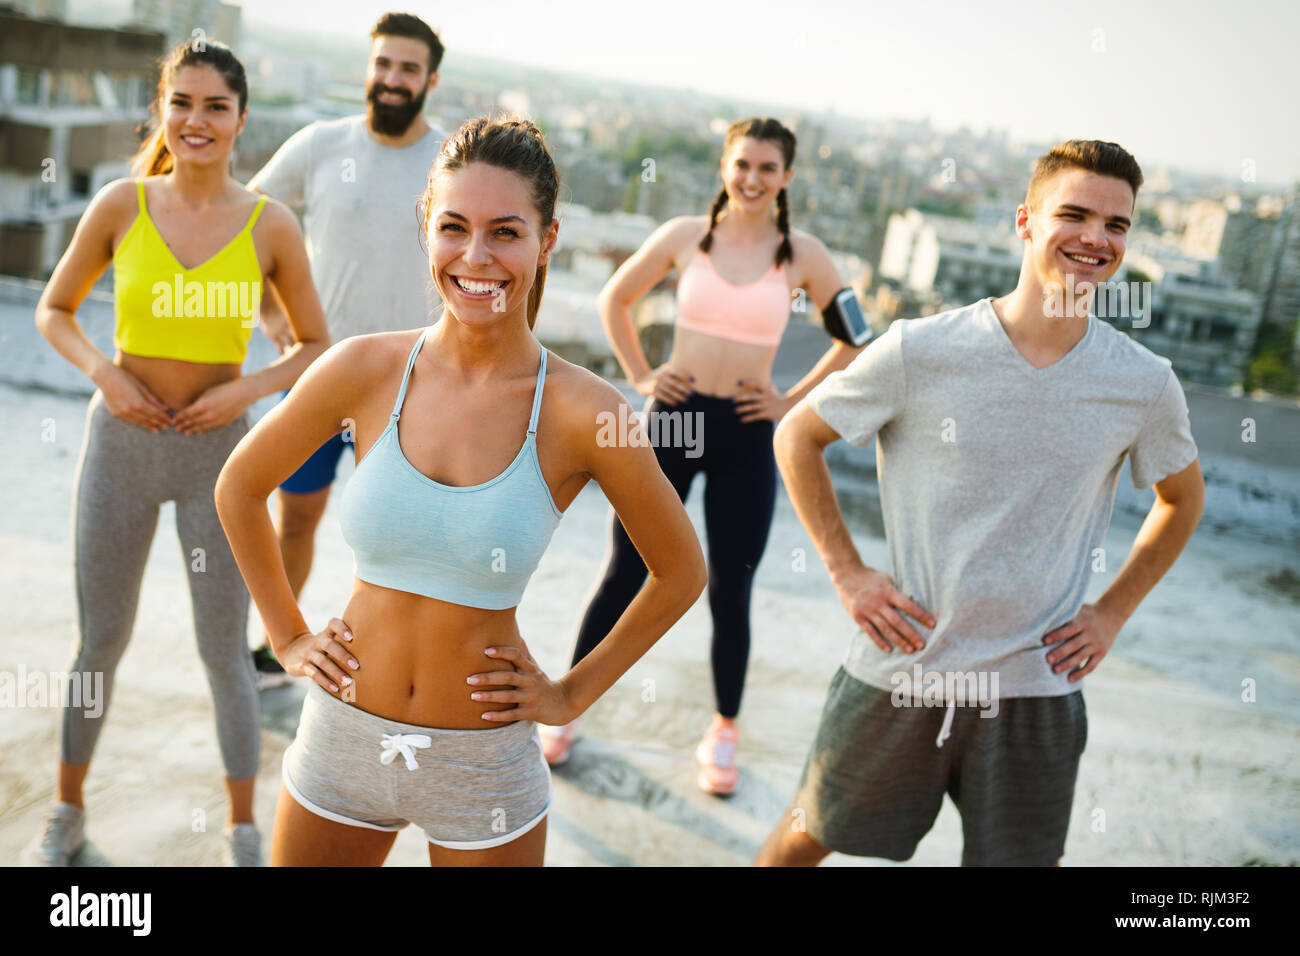 Fitness, sport, friendship and healthy lifestyle concept . Group of happy people exercising Stock Photo